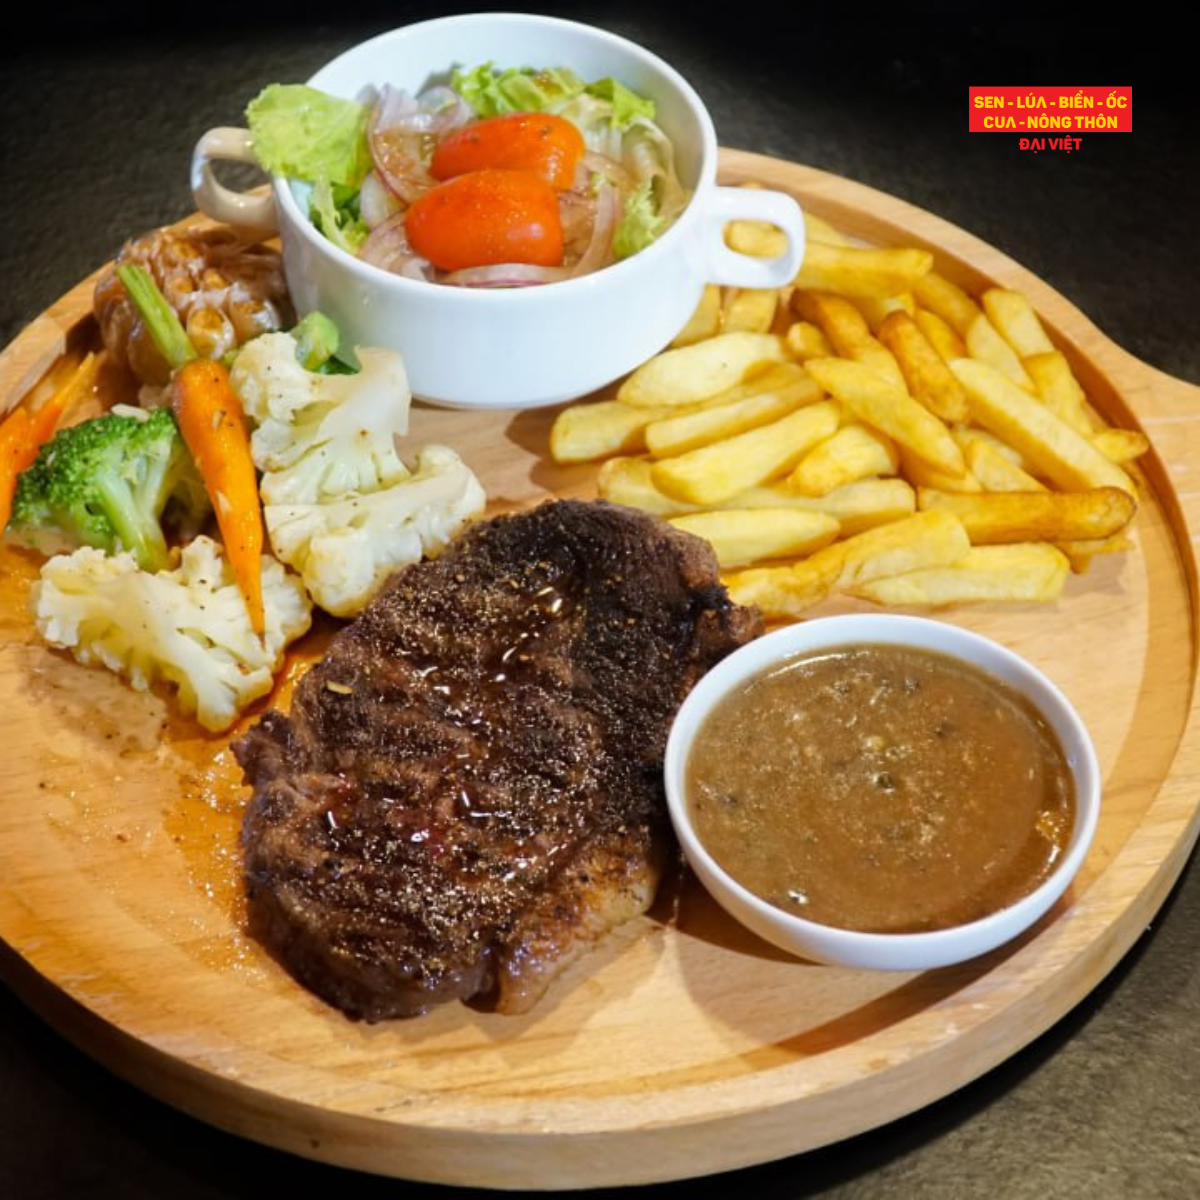  Beefsteak With French Fries 200gr 